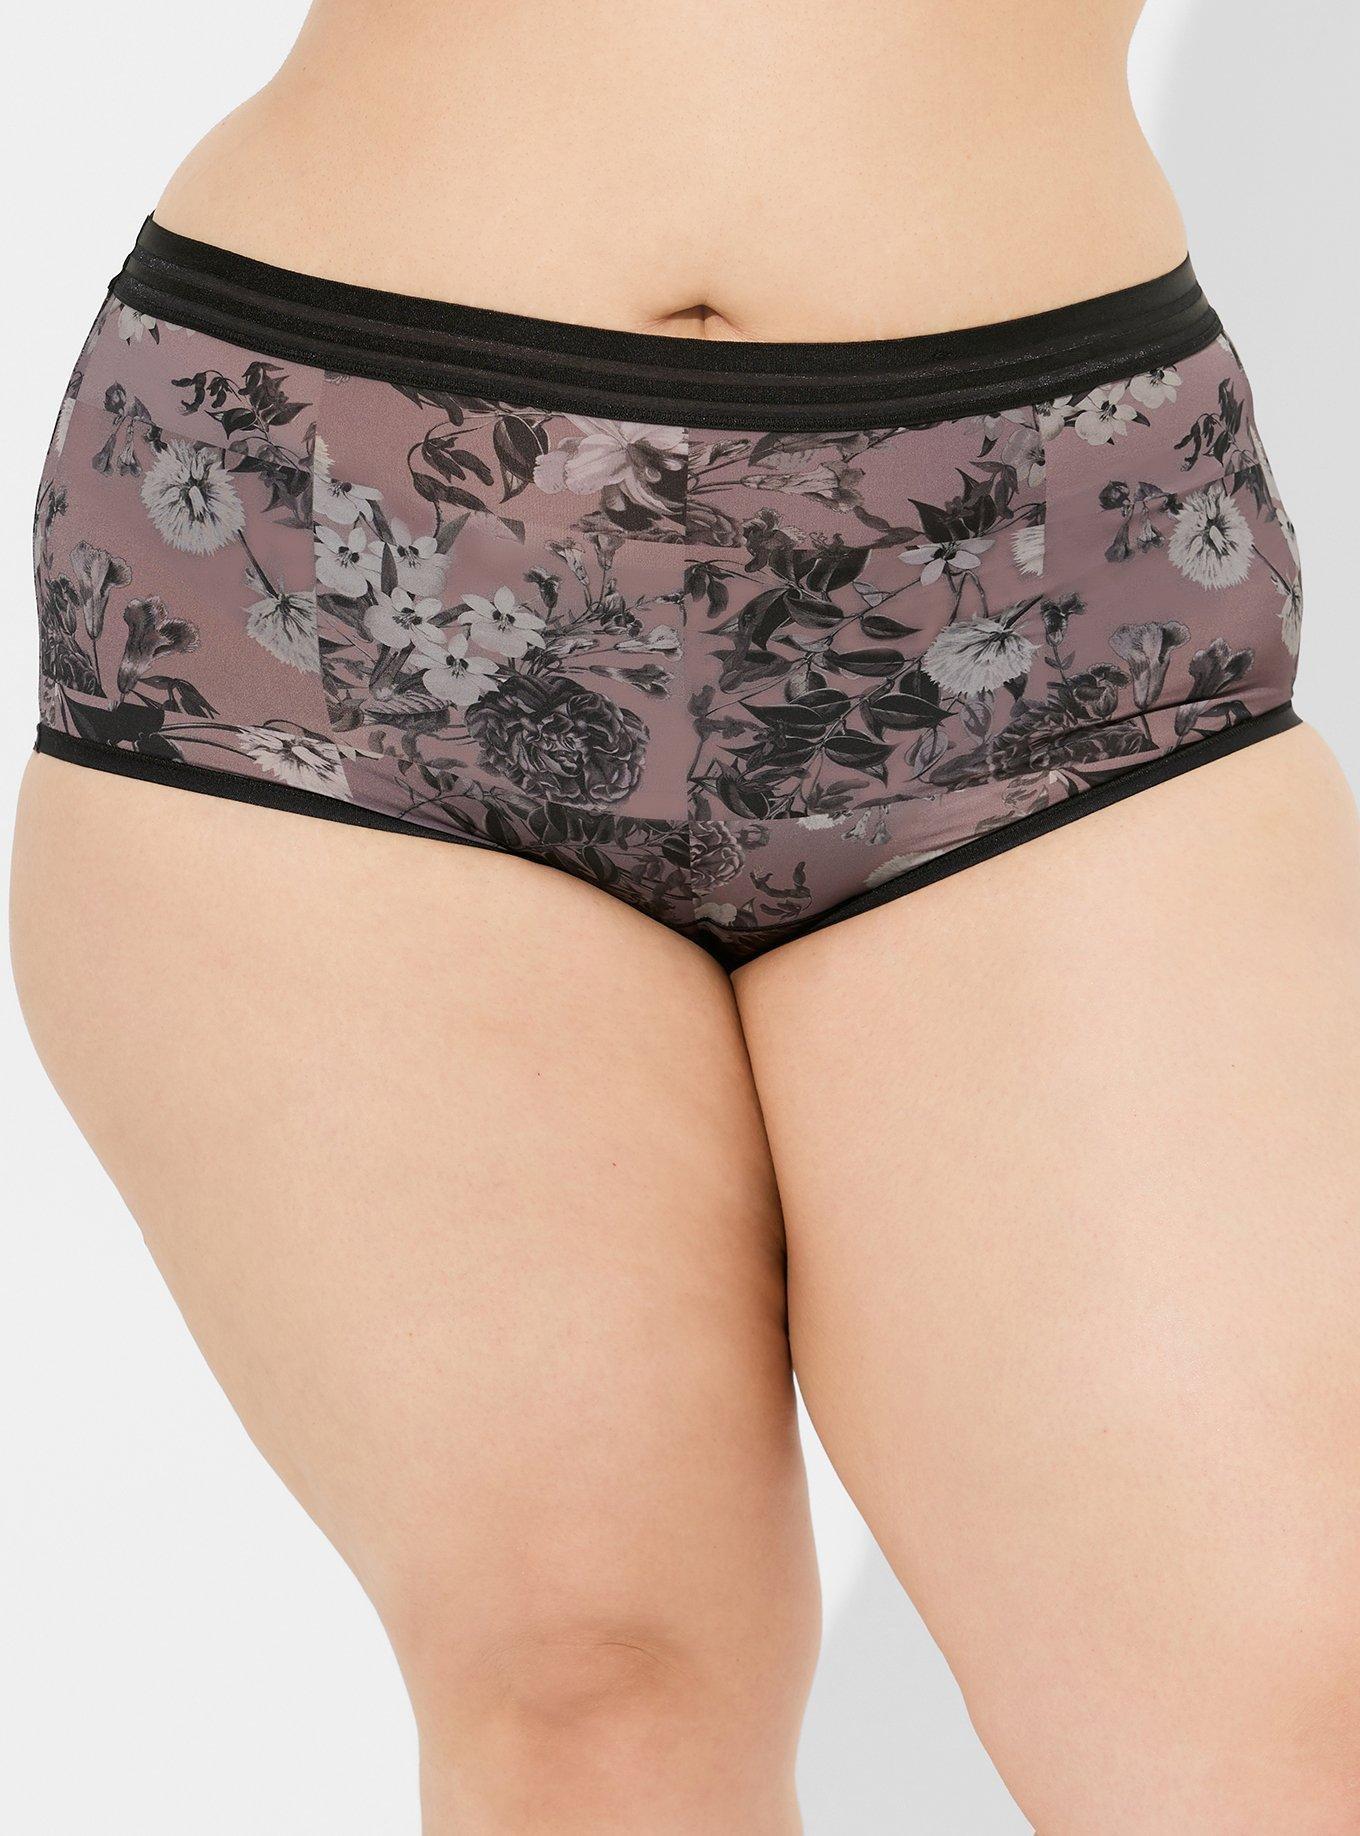 Marilyn Monroe Women's Seamless Sports Band Hipster Panties 5 Pack - Pink  Florals - Small 